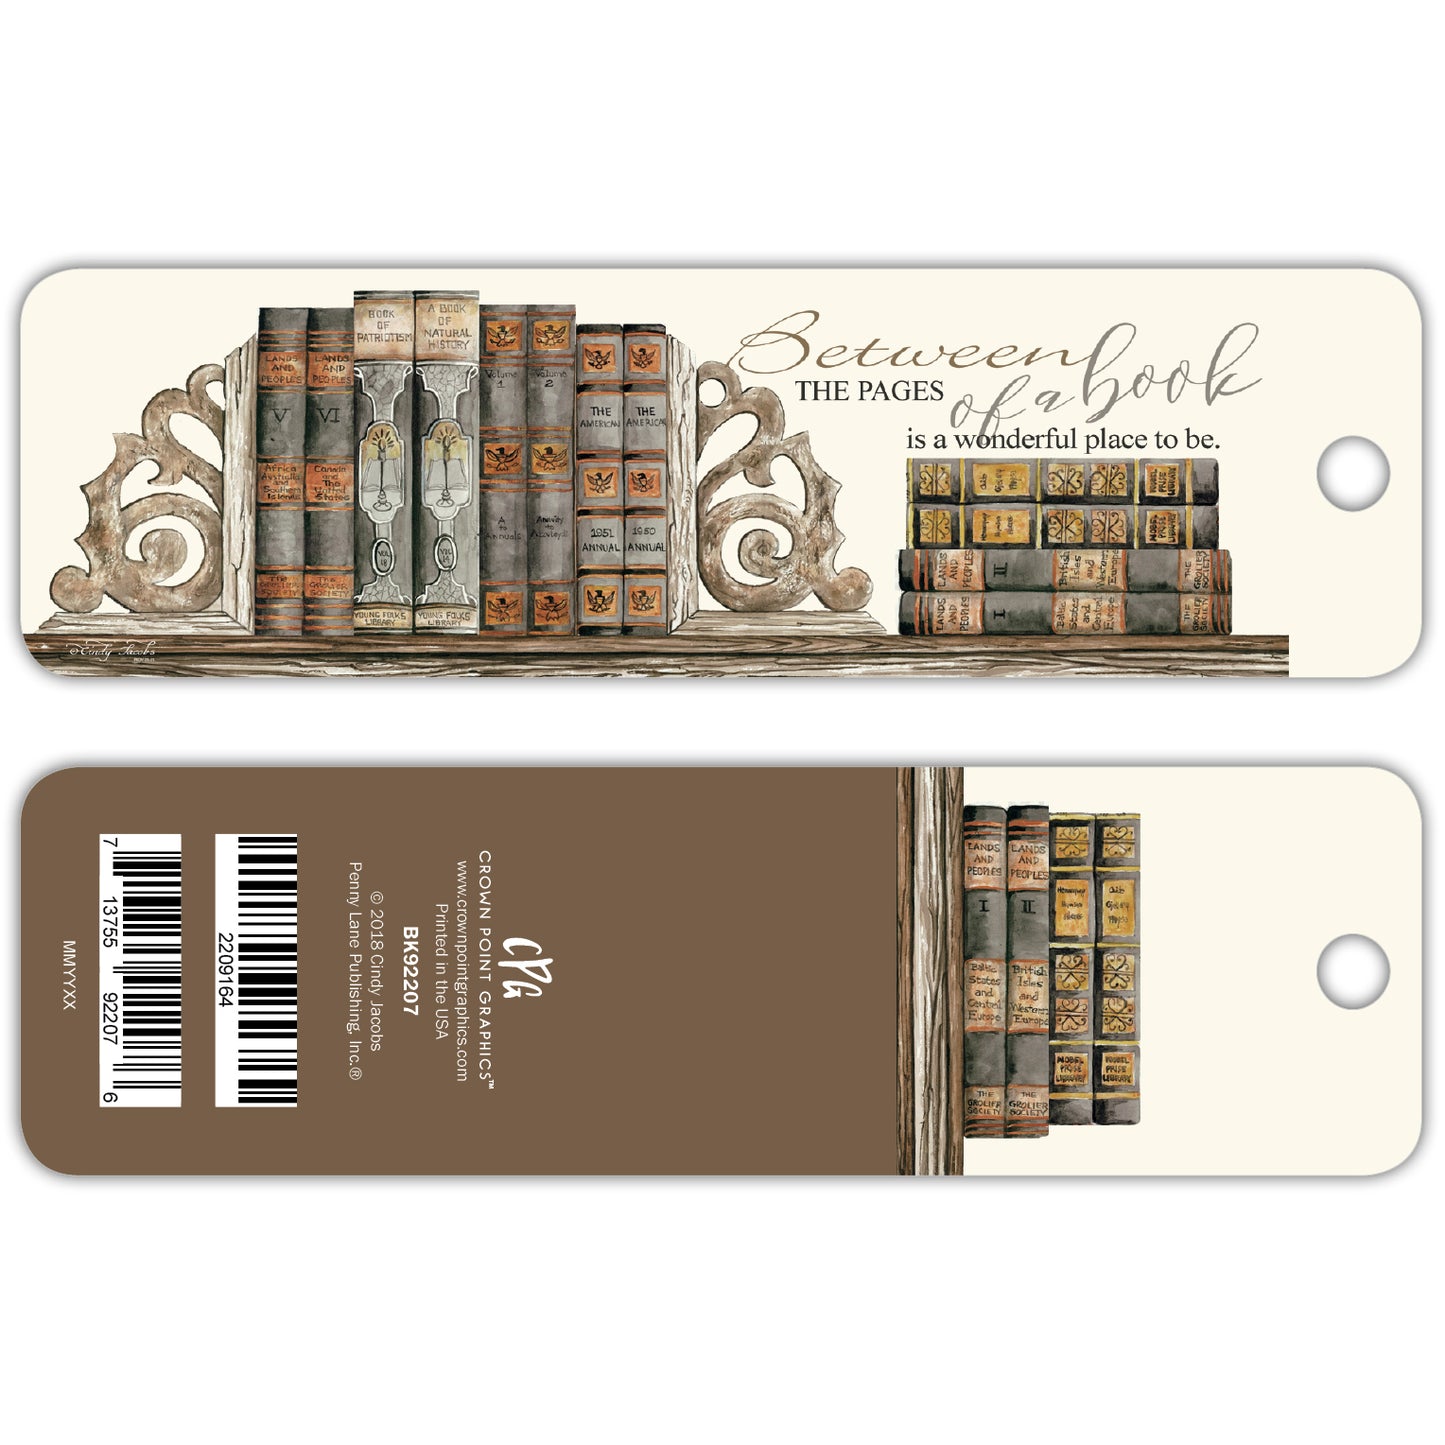 Between the Pages -bookmark